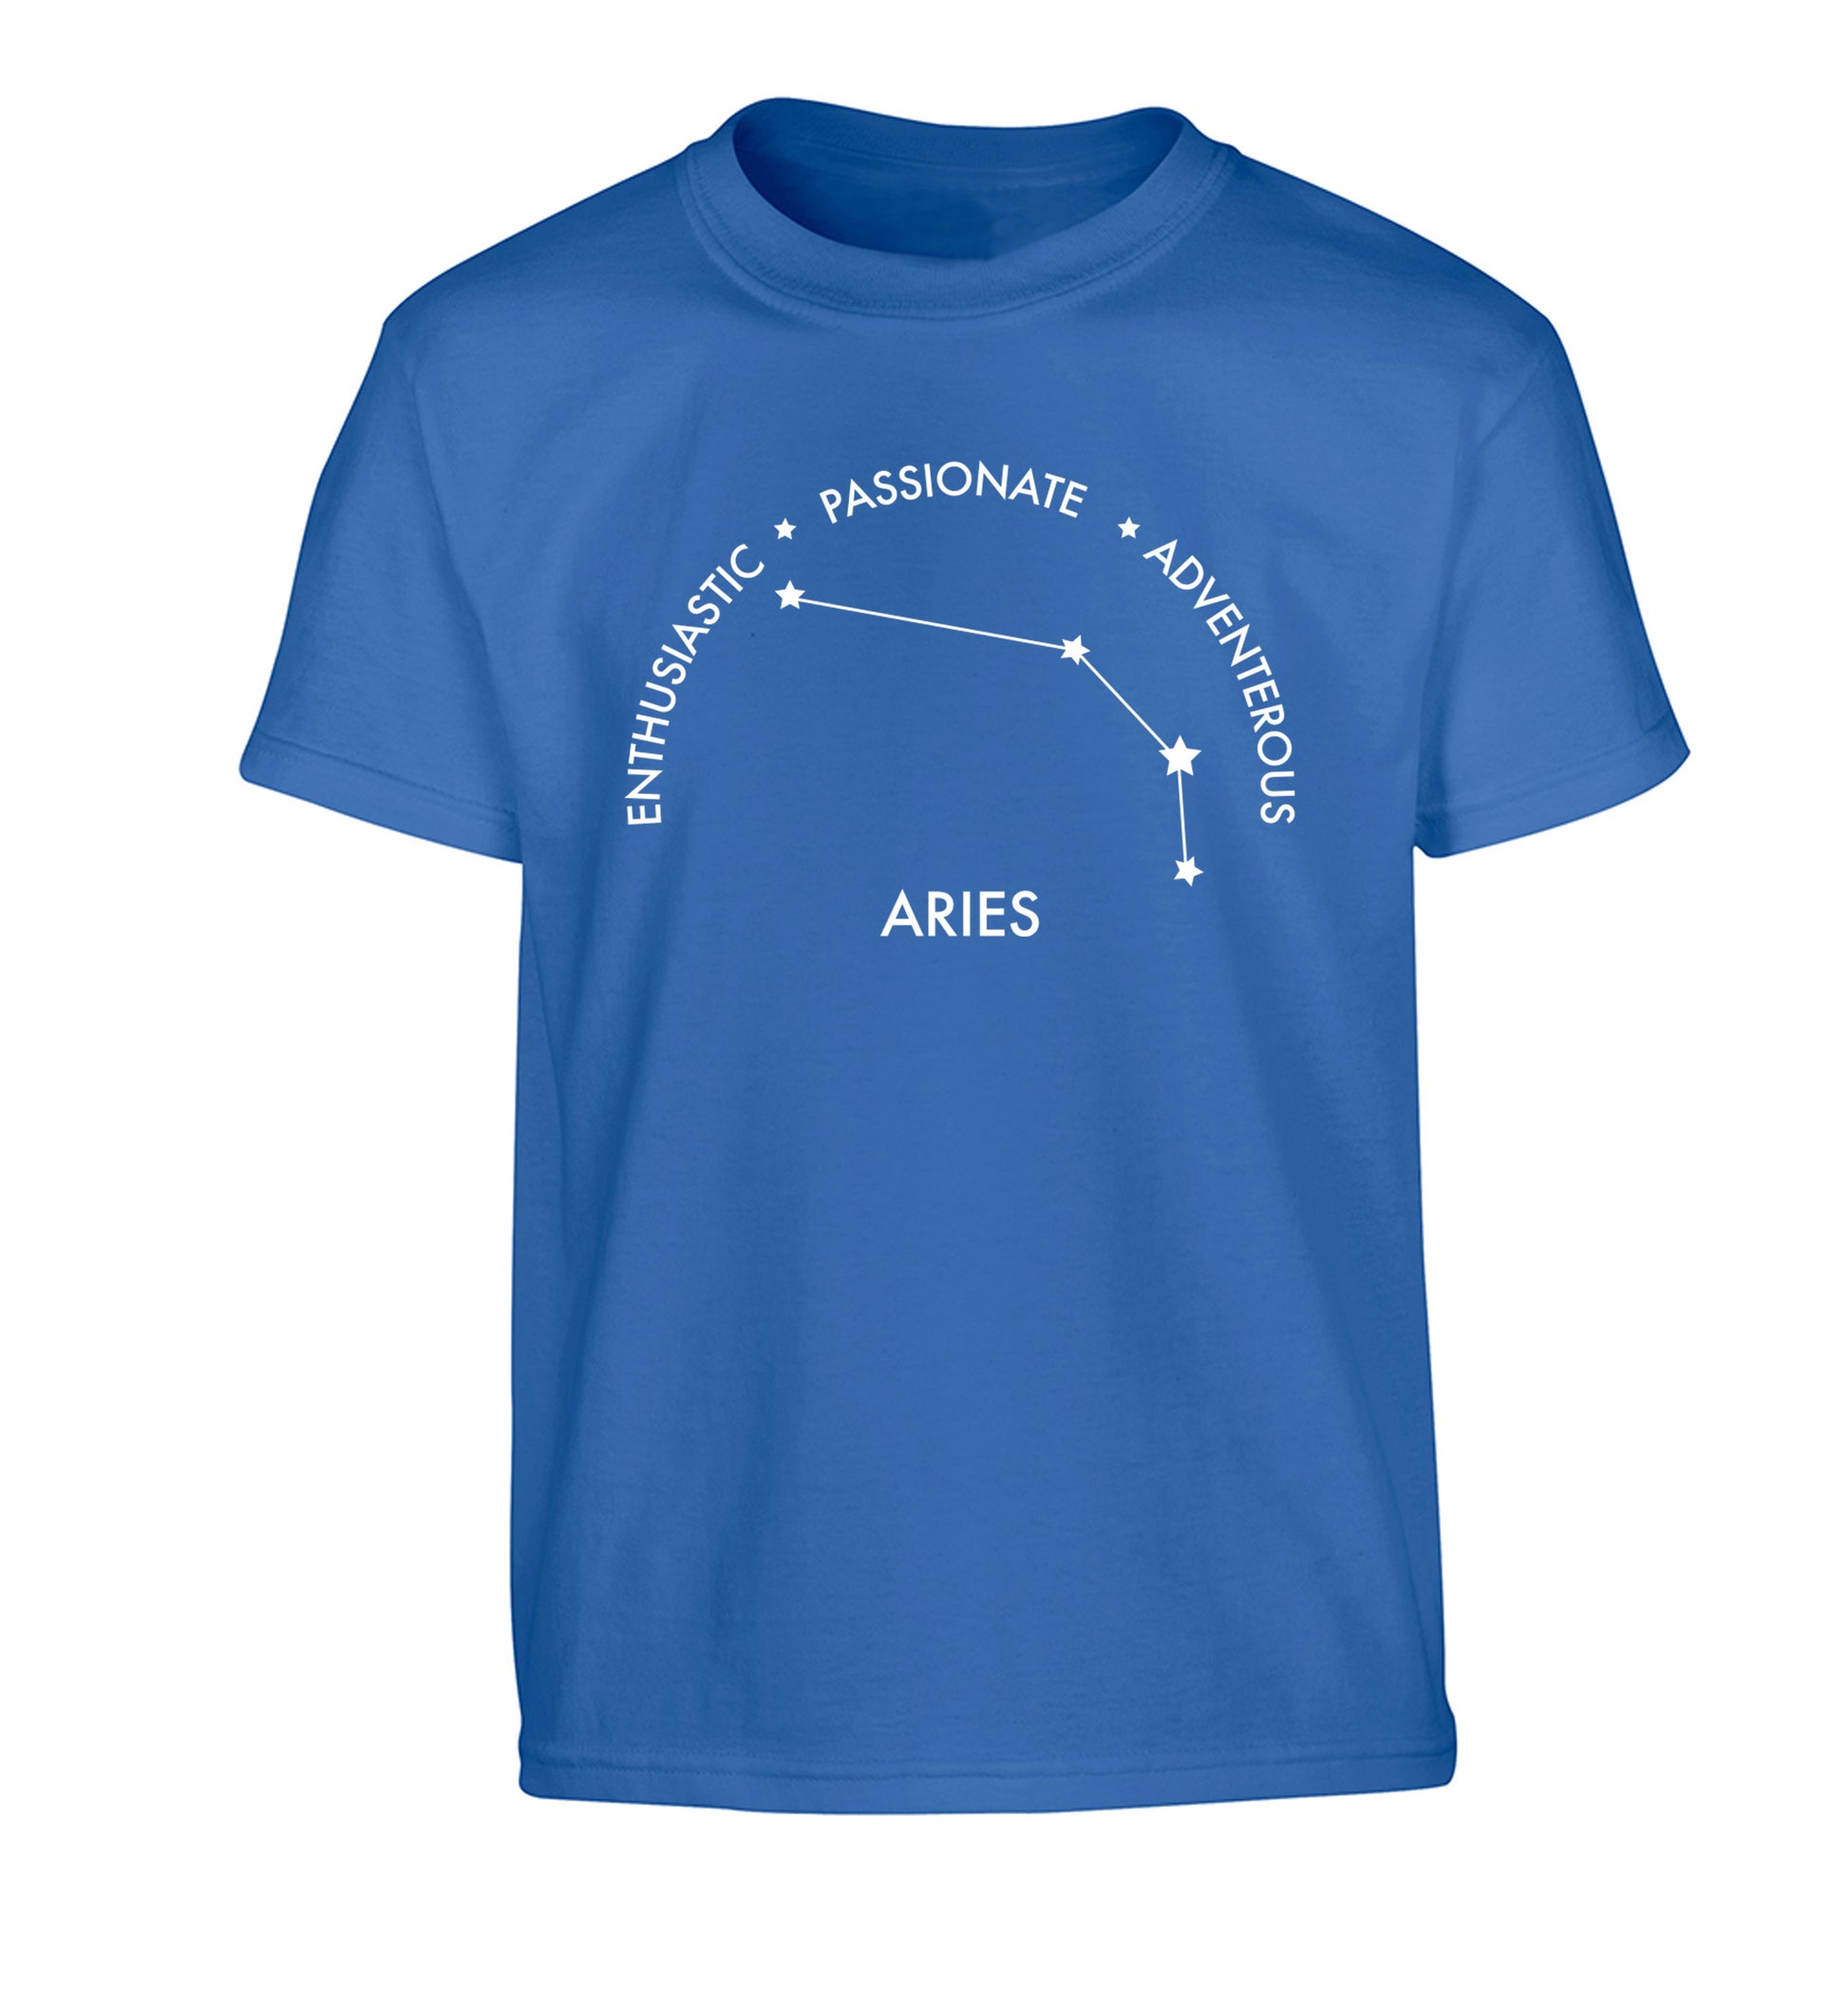 Aries enthusiastic | passionate | adventerous Children's blue Tshirt 12-13 Years